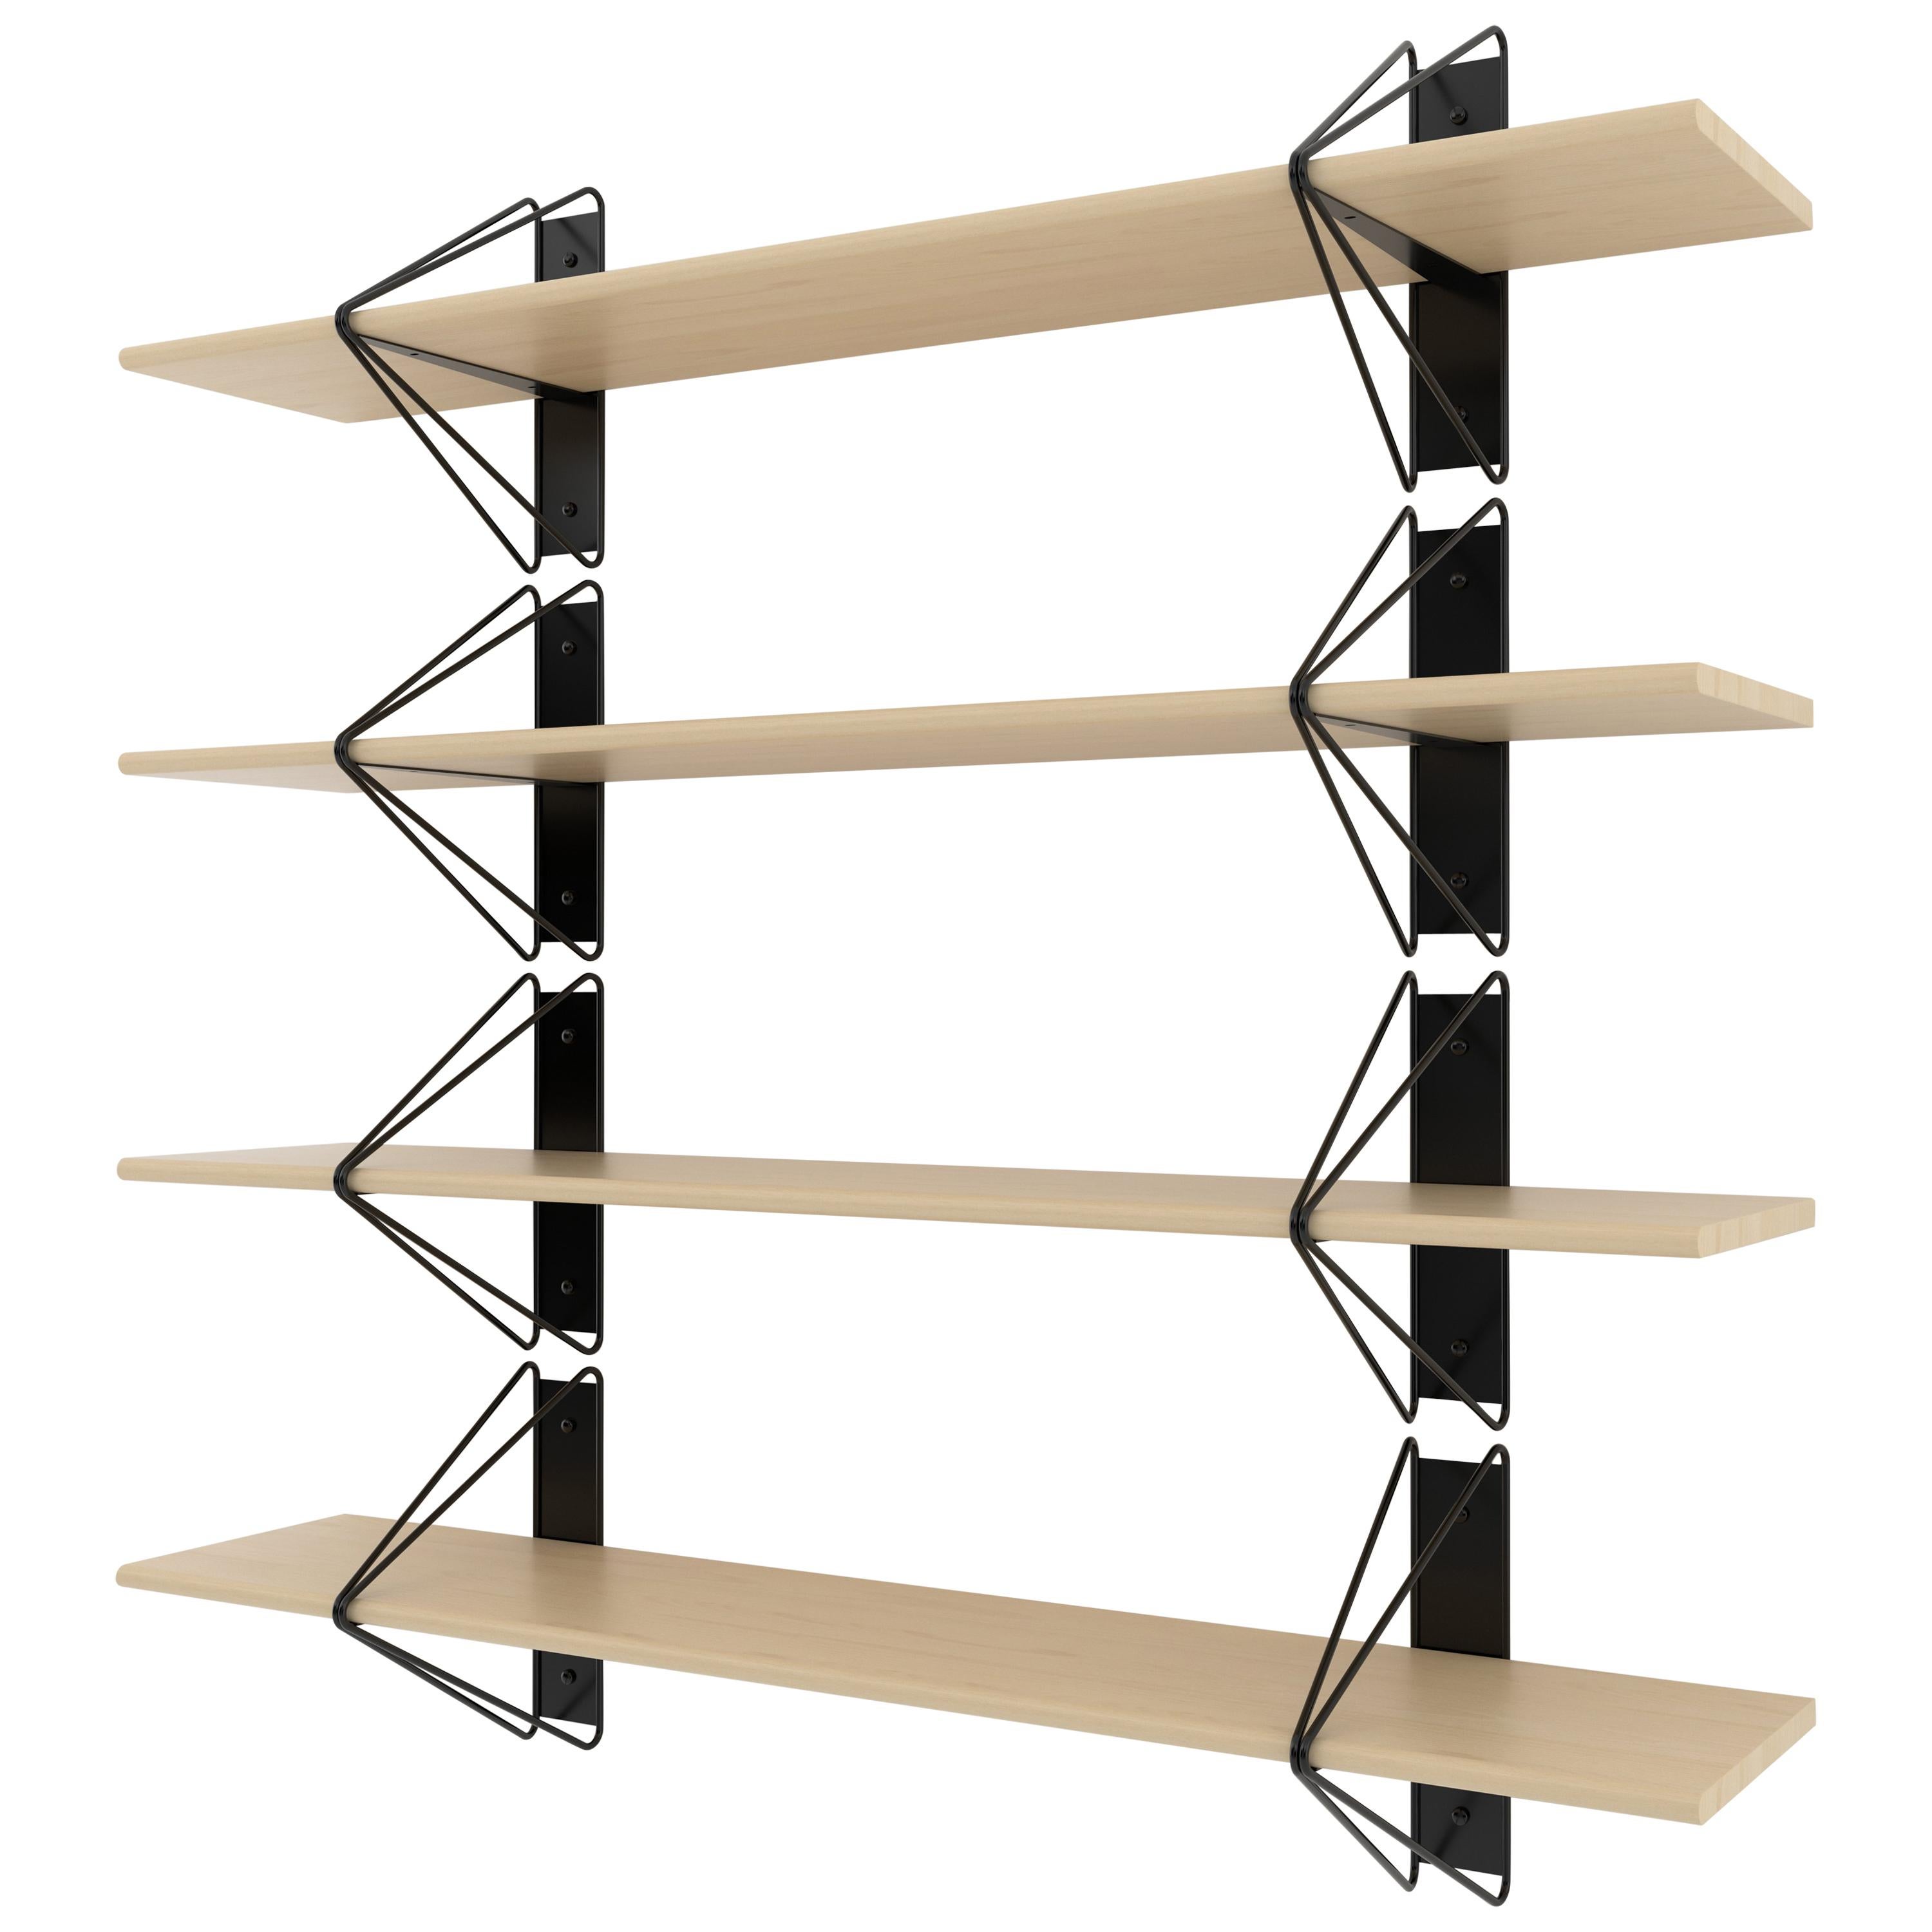 American Set of 4 Strut Shelves from Souda, Black and Maple, Made to Order For Sale